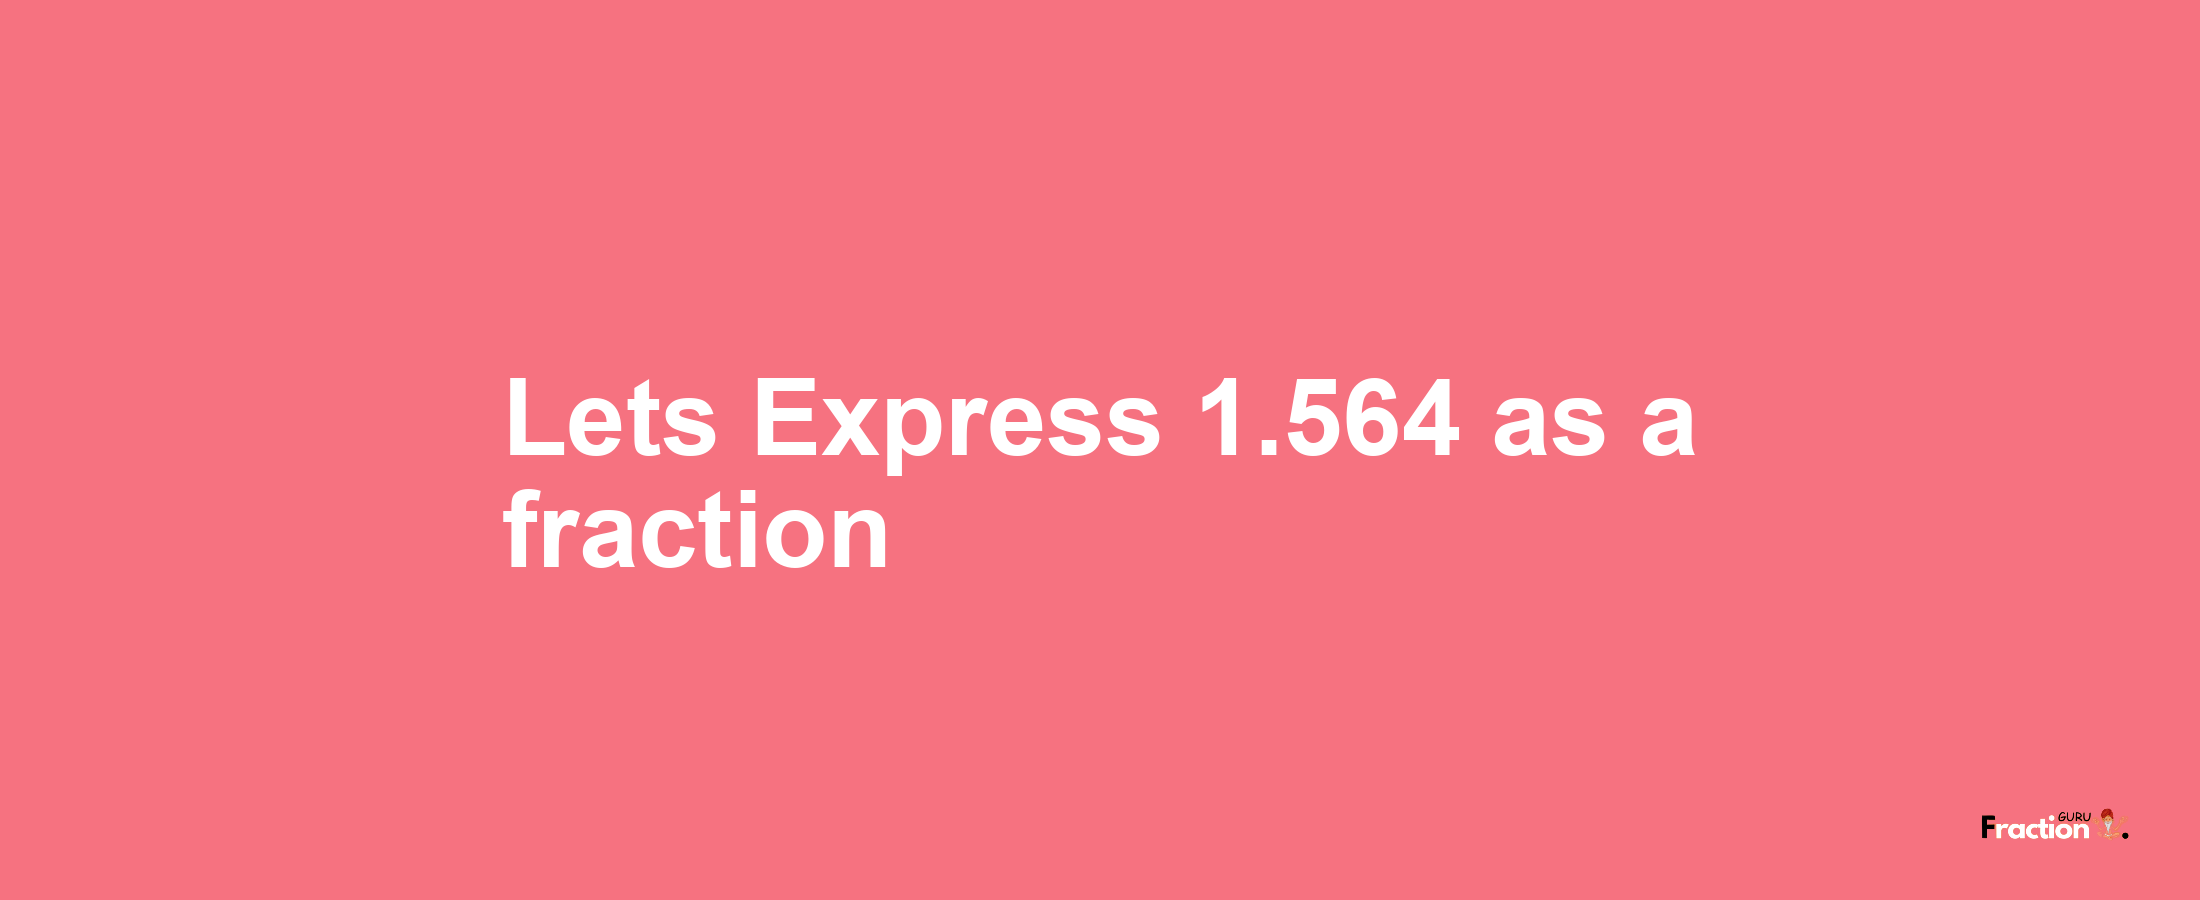 Lets Express 1.564 as afraction